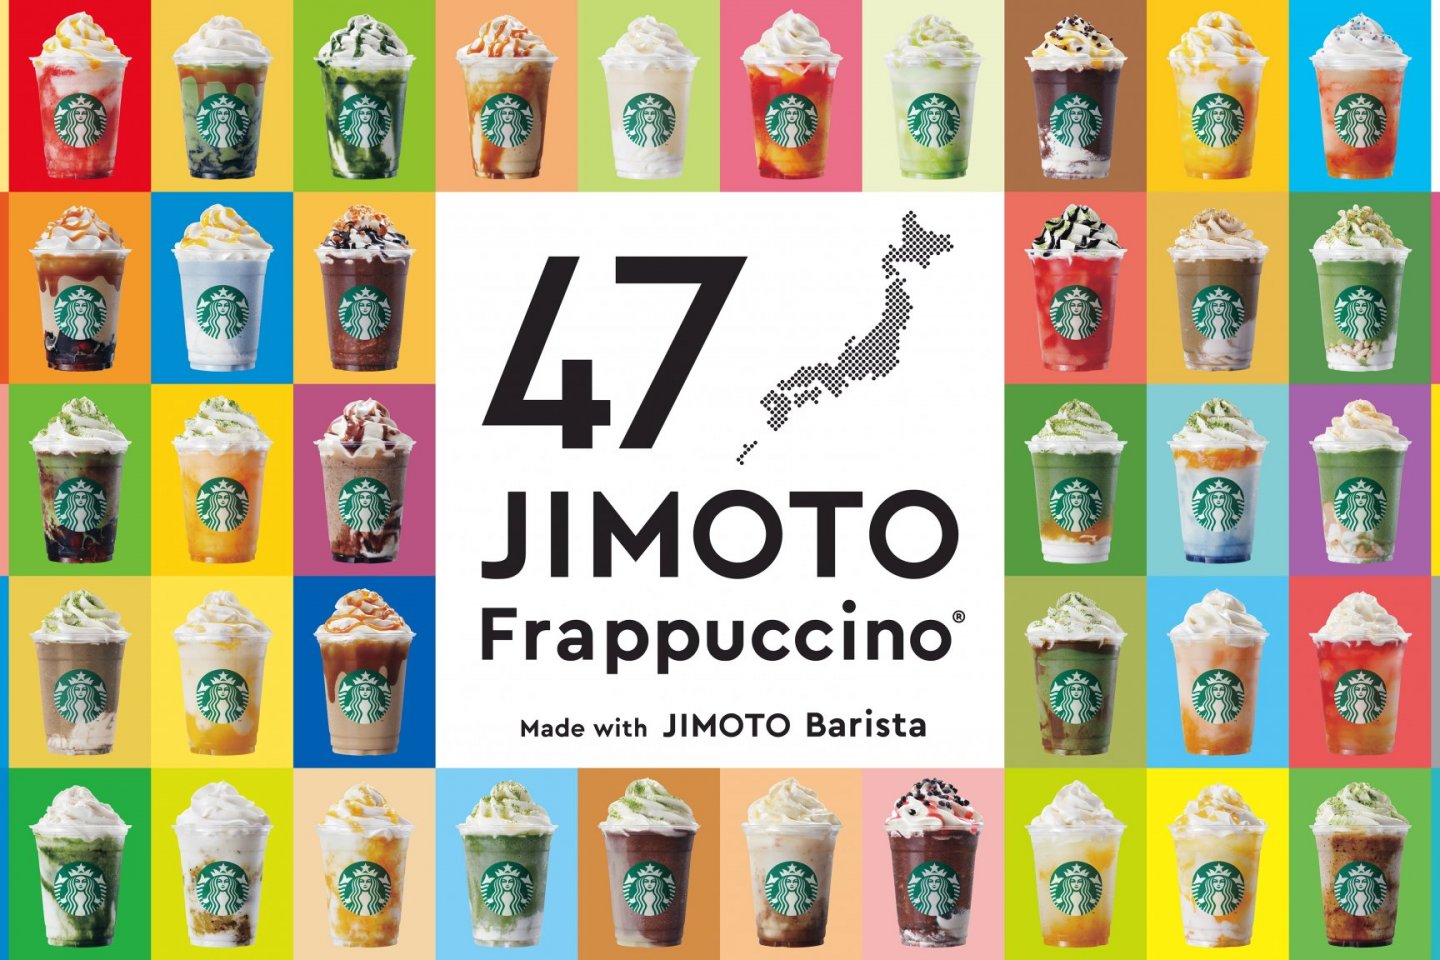 The 47 Jimoto Frappuccino project brings a taste of each prefecture to Starbucks customers